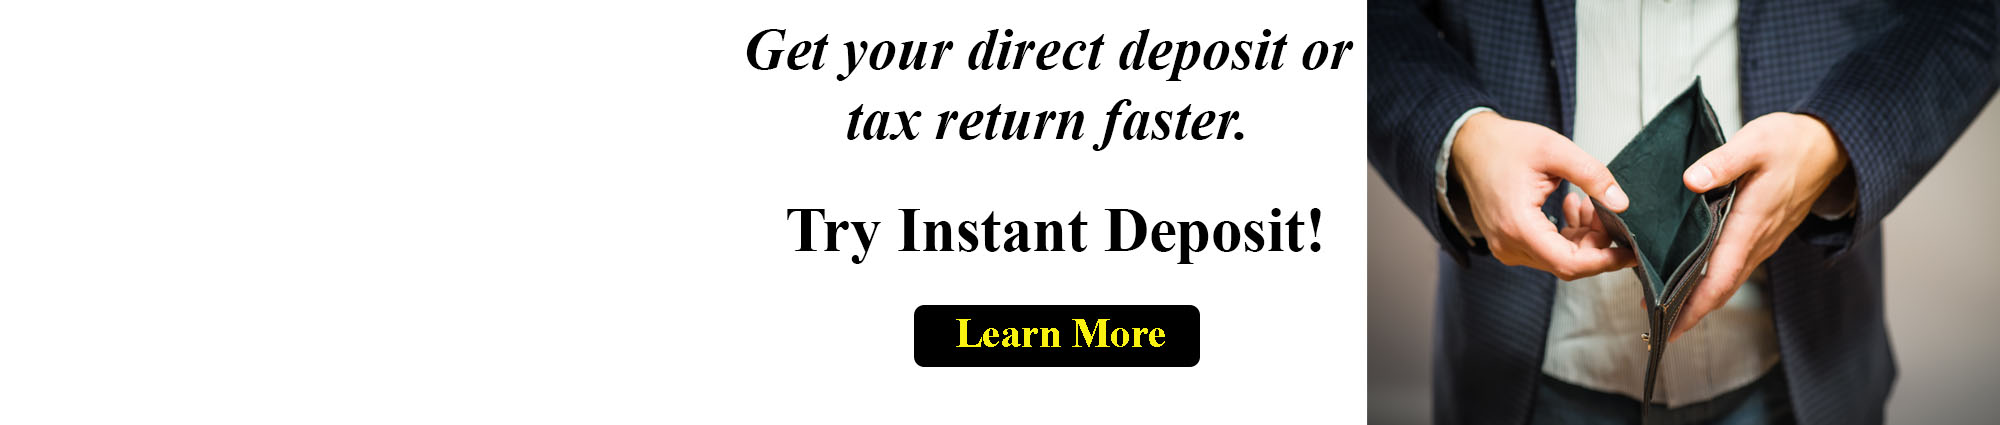 Get your direct deposit or tax return faster. Try Instant Deposit. Learn More.